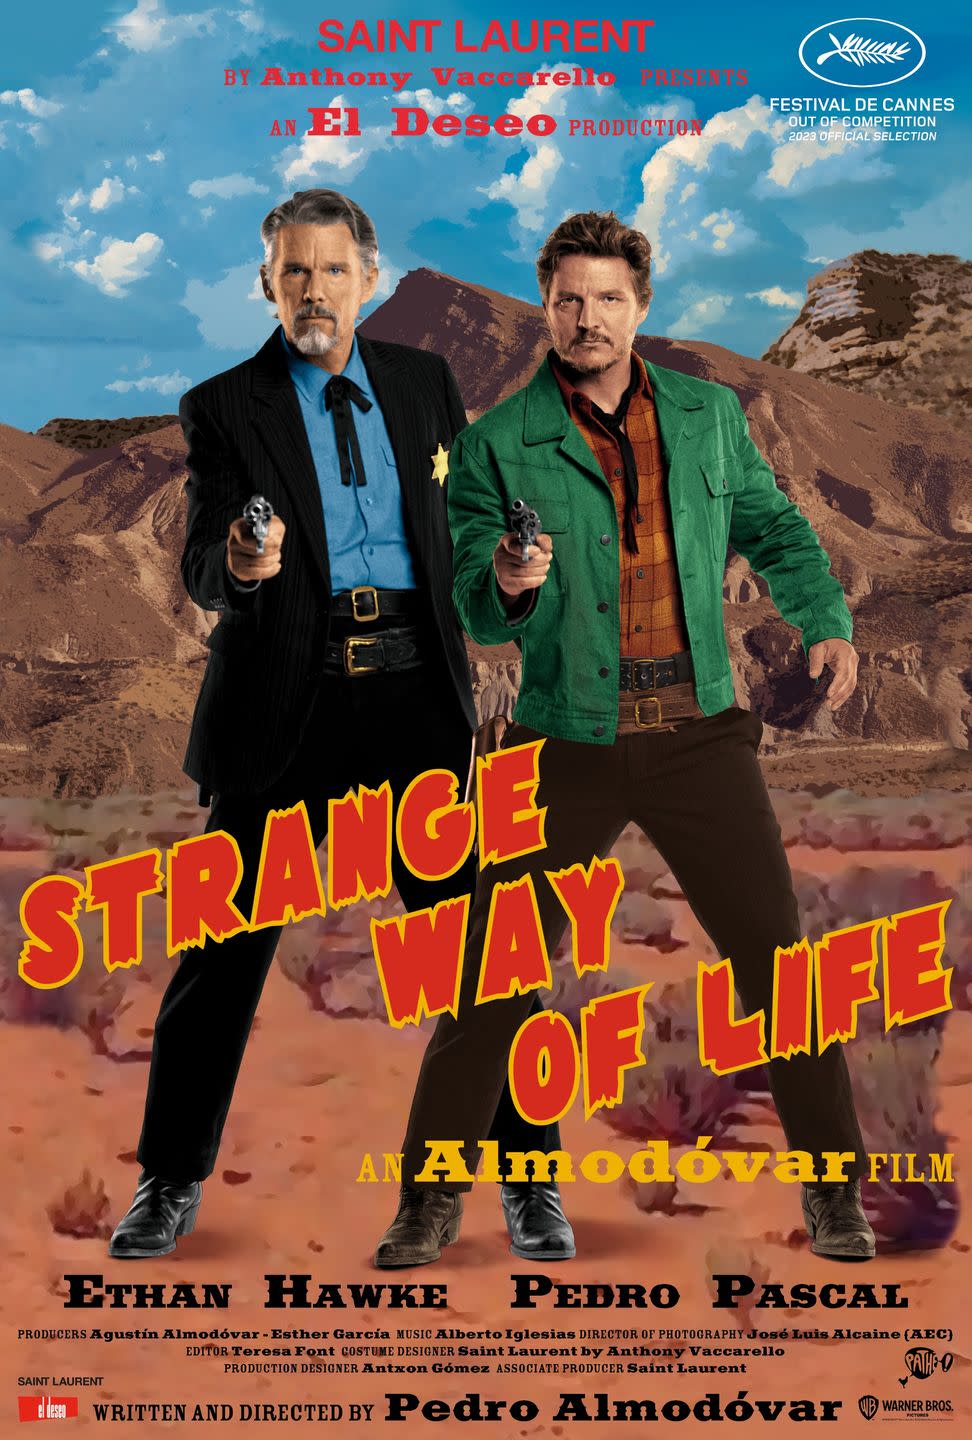 strange way of life poster starring ethan hawke and pedro pascal